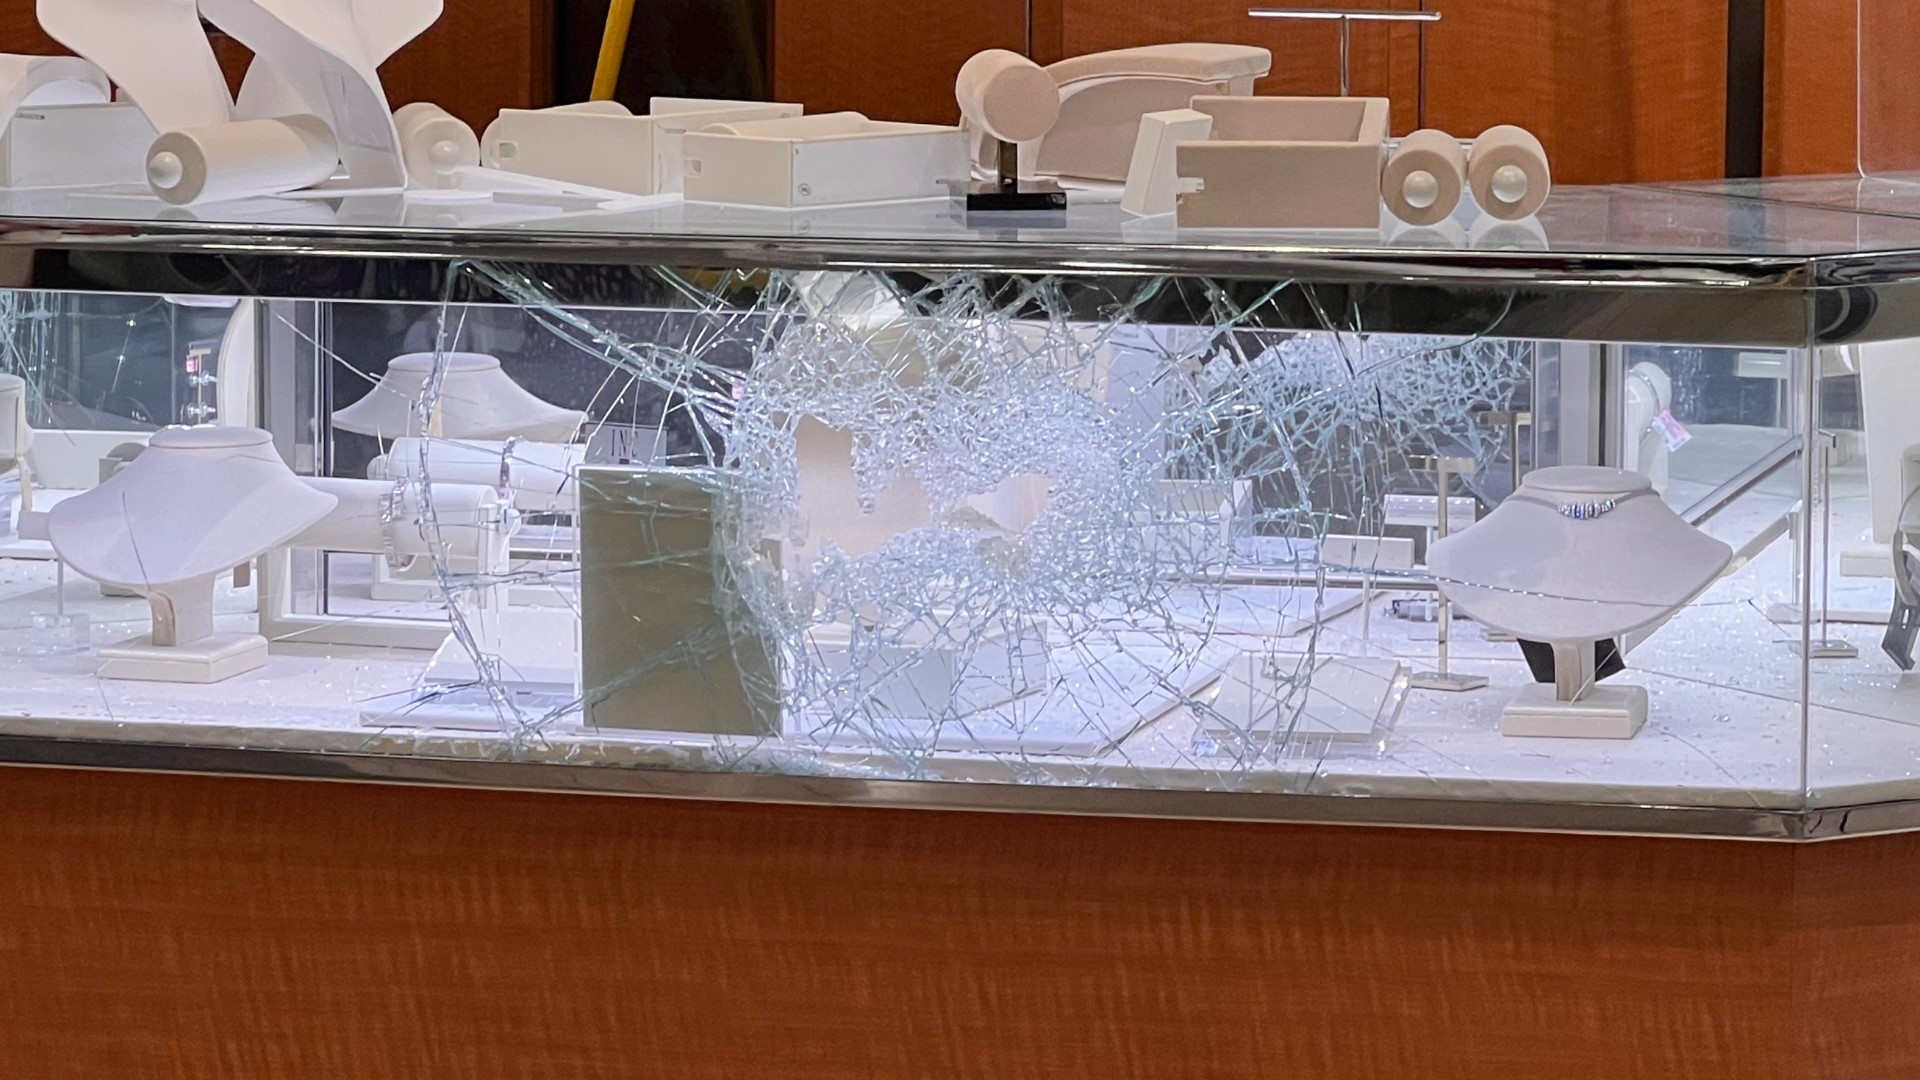 Another jewelry robbery occurred at the mall in December at Helzberg Diamonds.